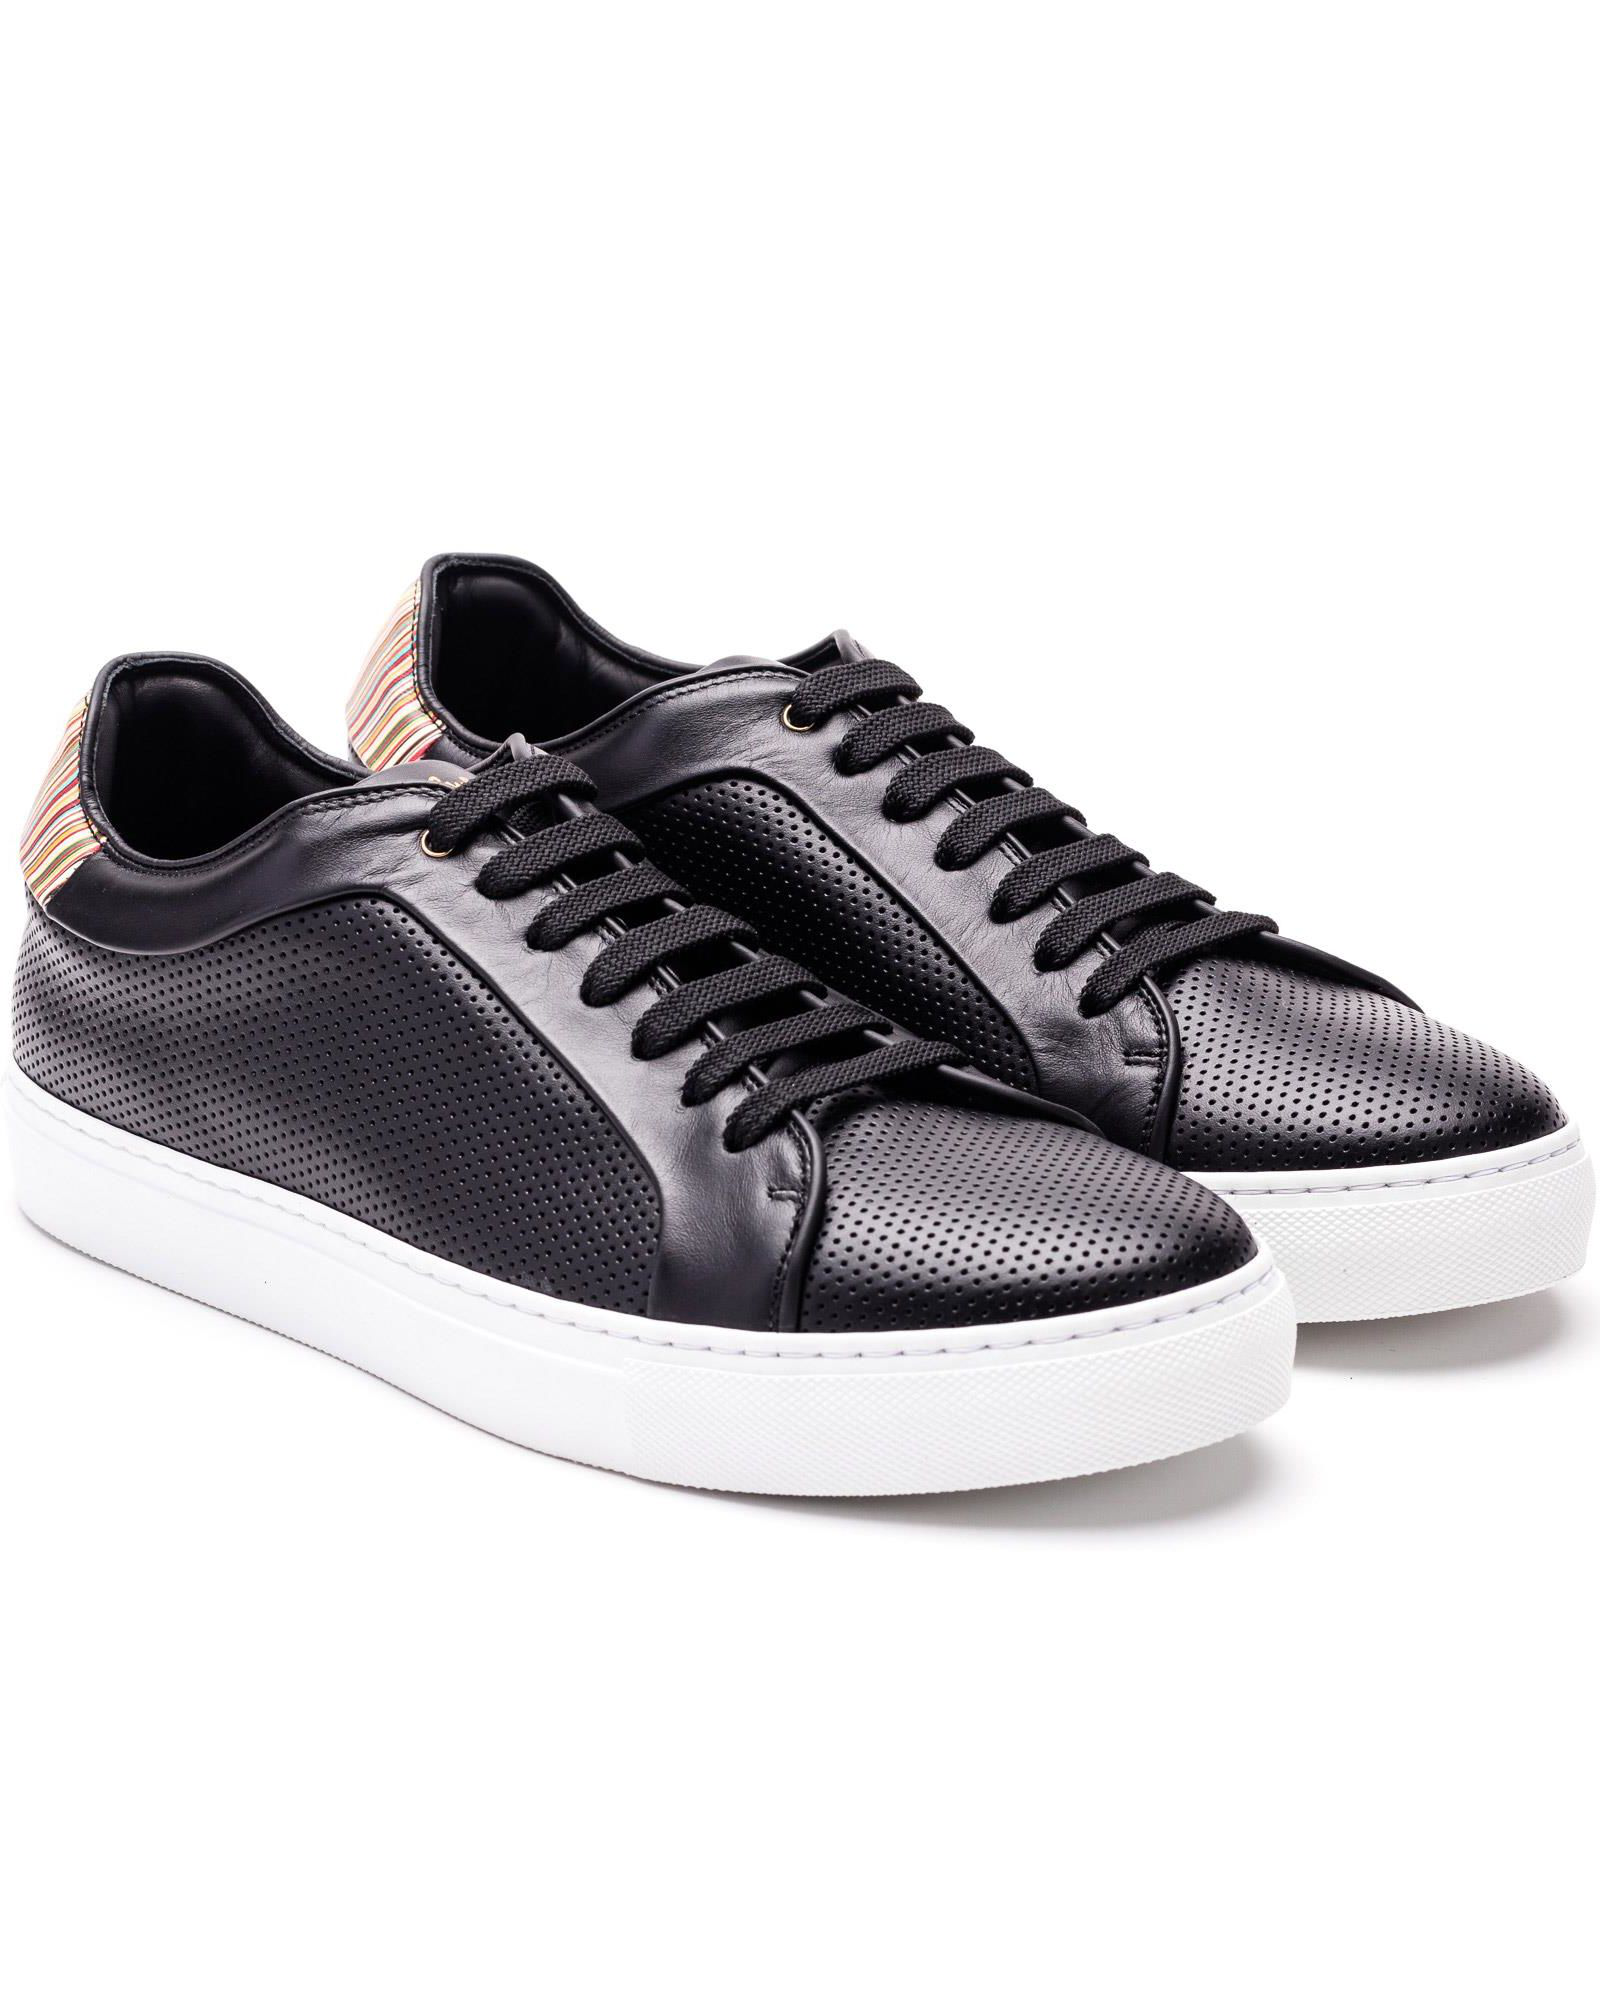 Paul Smith Leather Sneakers In Black | ModeSens